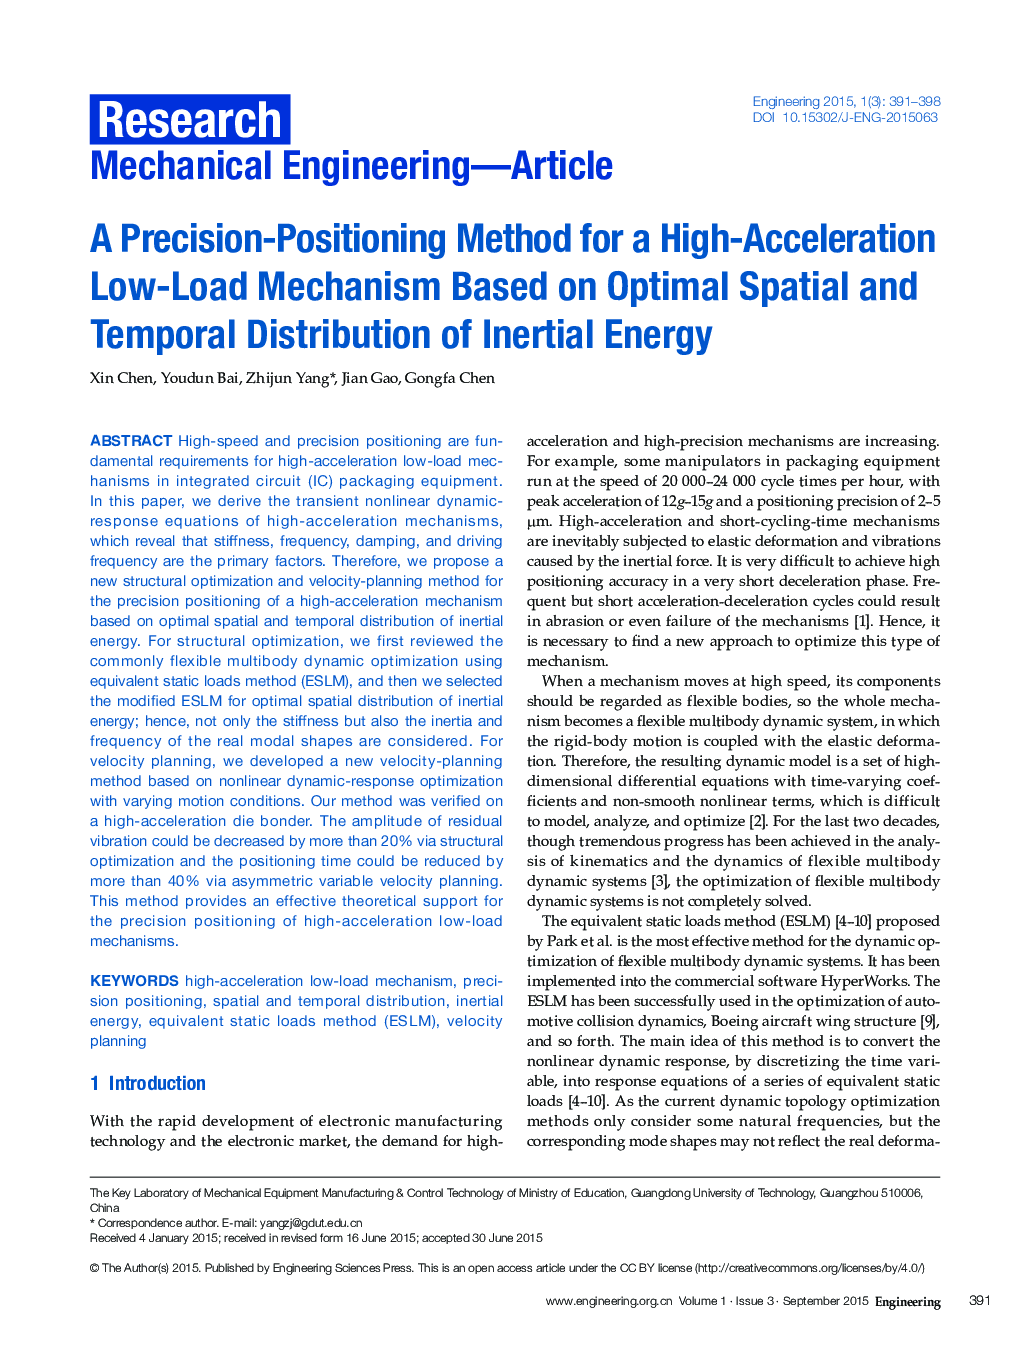 A Precision-Positioning Method for a High-Acceleration Low-Load Mechanism Based on Optimal Spatial and Temporal Distribution of Inertial Energy